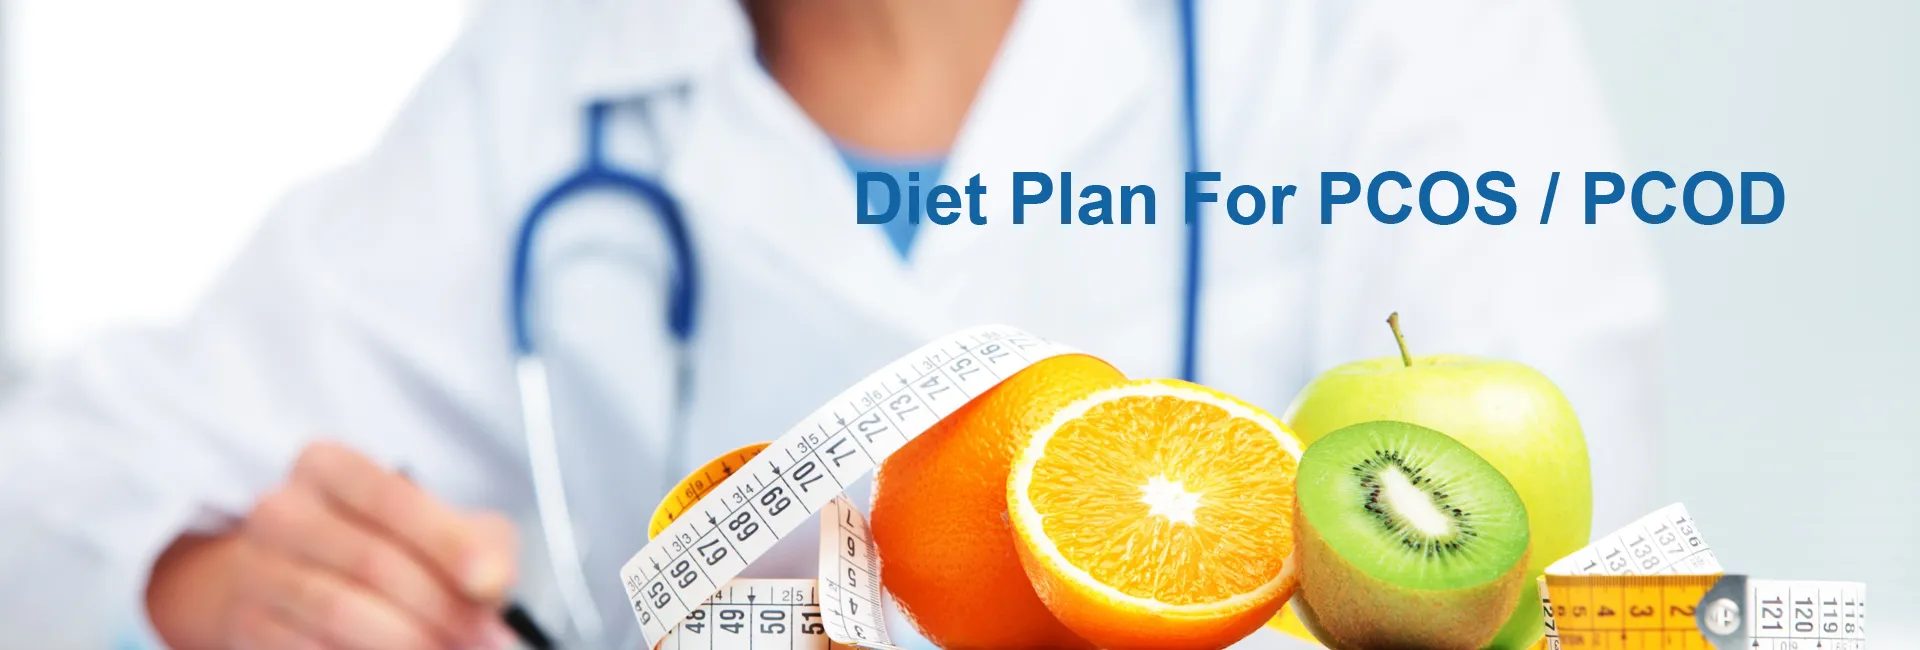 Diet Plan For PCOS / PCOD In Montreal